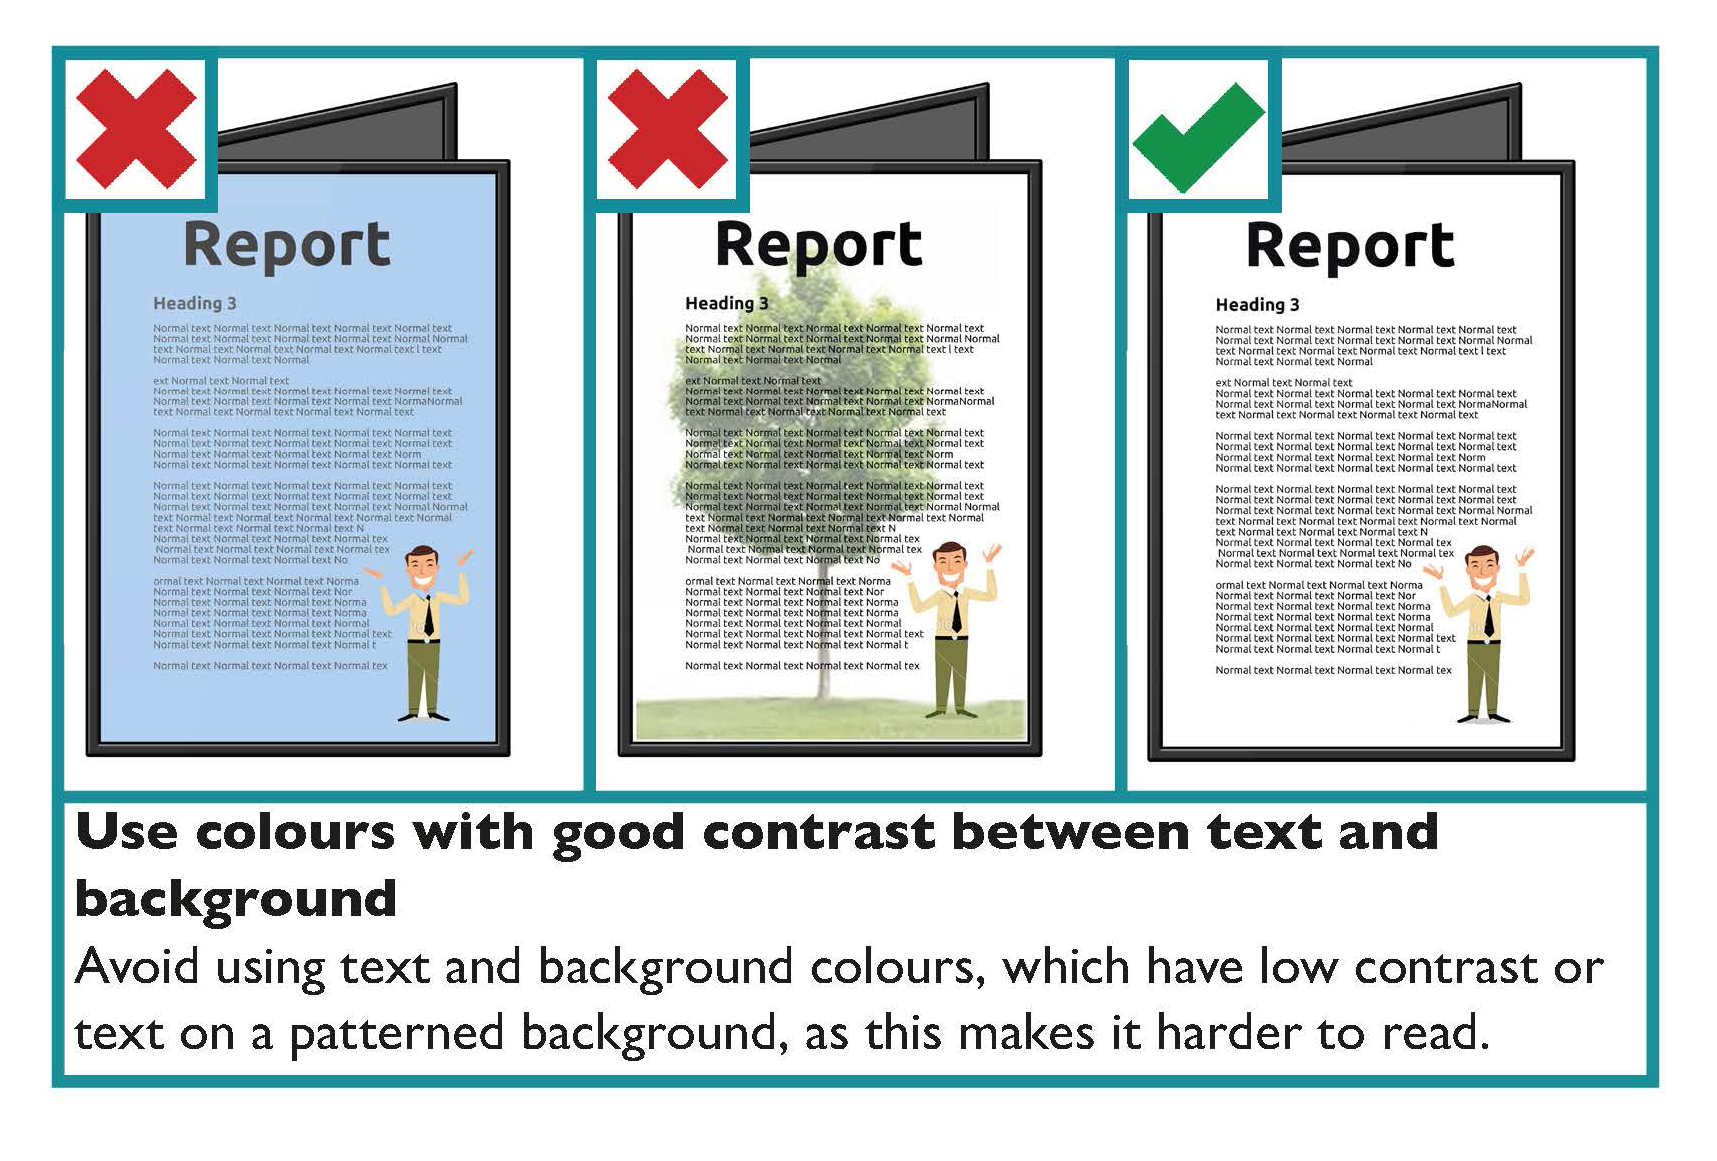 The image shows three examples of contrast between text and background colours. Avoid using text and background colours or patterns which have low contrast between the text and background